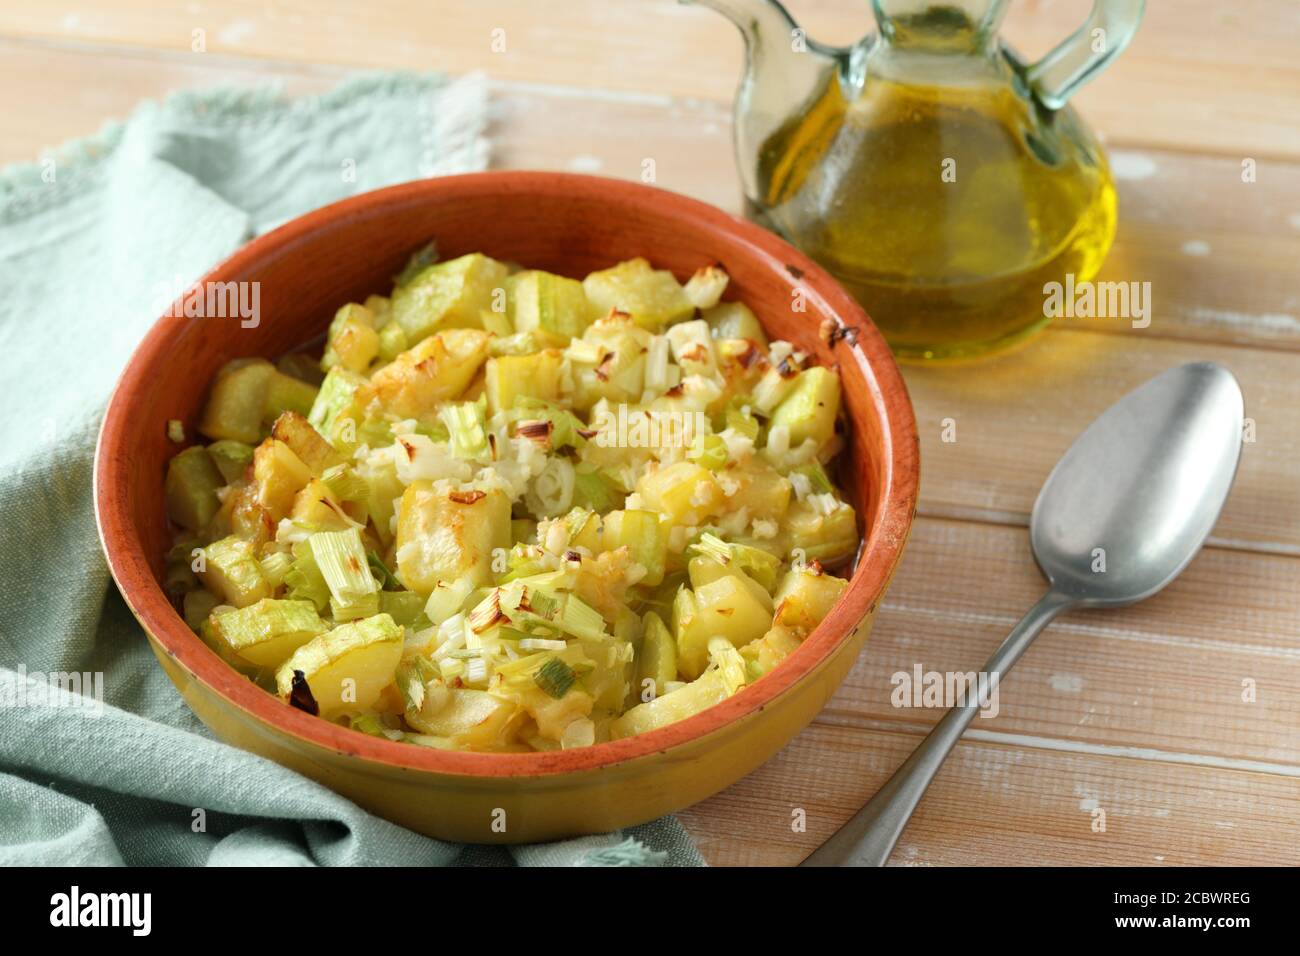 Summer squash and green onion gratin in a baking dish on a rustic table Stock Photo